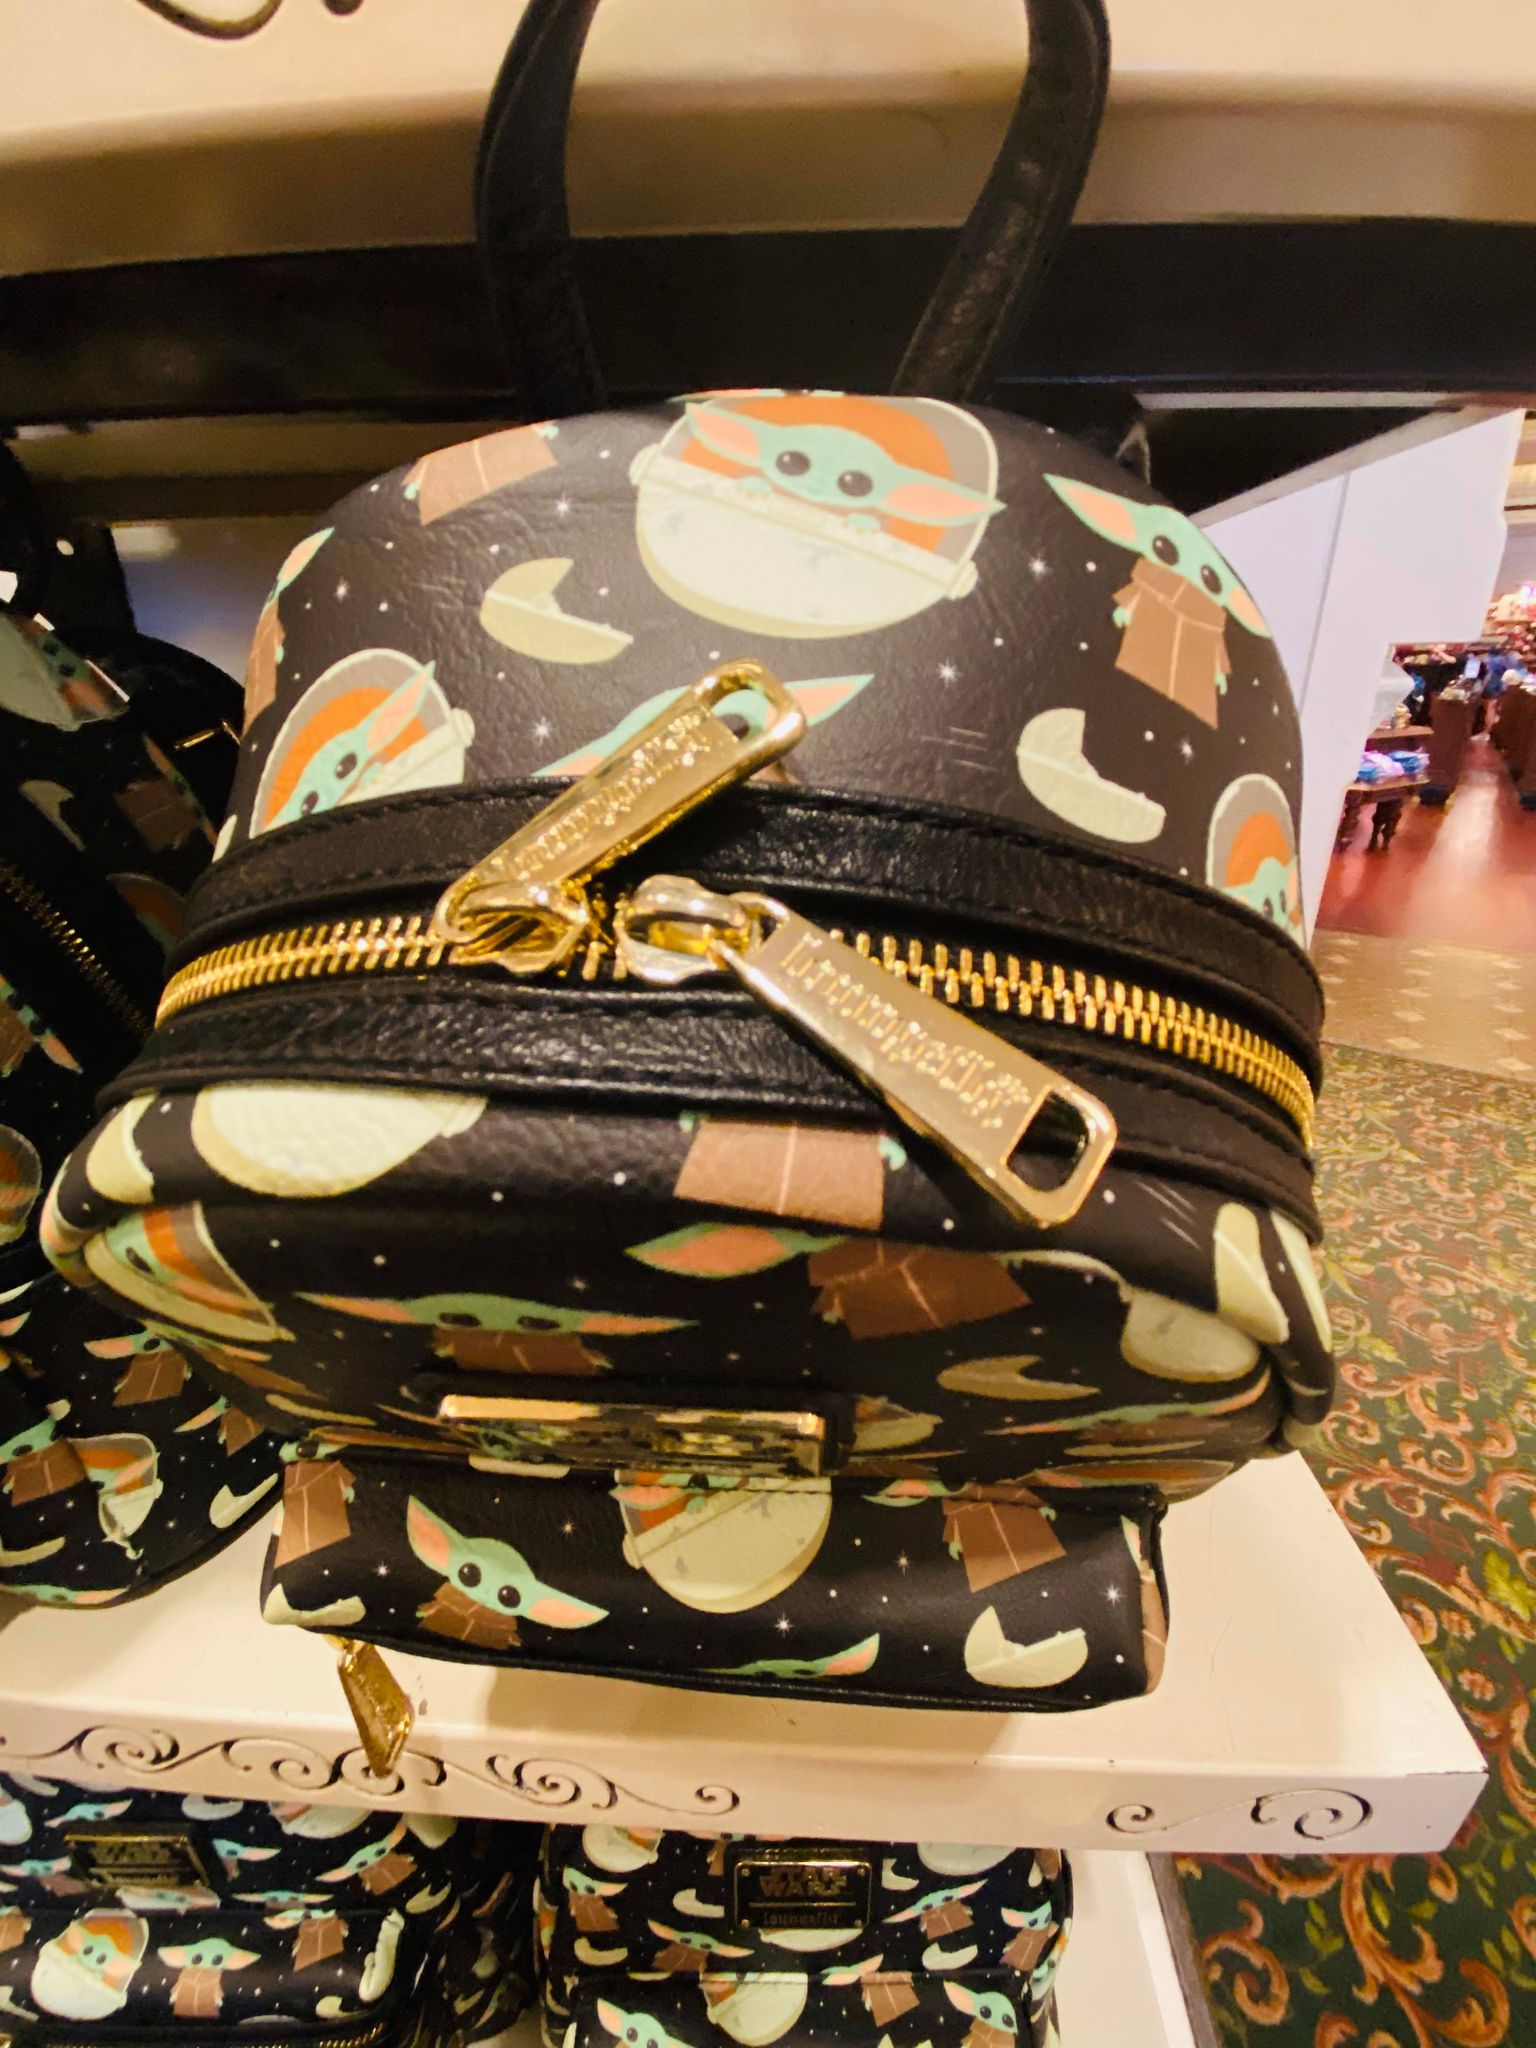 Bring Baby Yoda Along With The Child Loungefly Mini Backpack In Disney World The Disney Food Blog